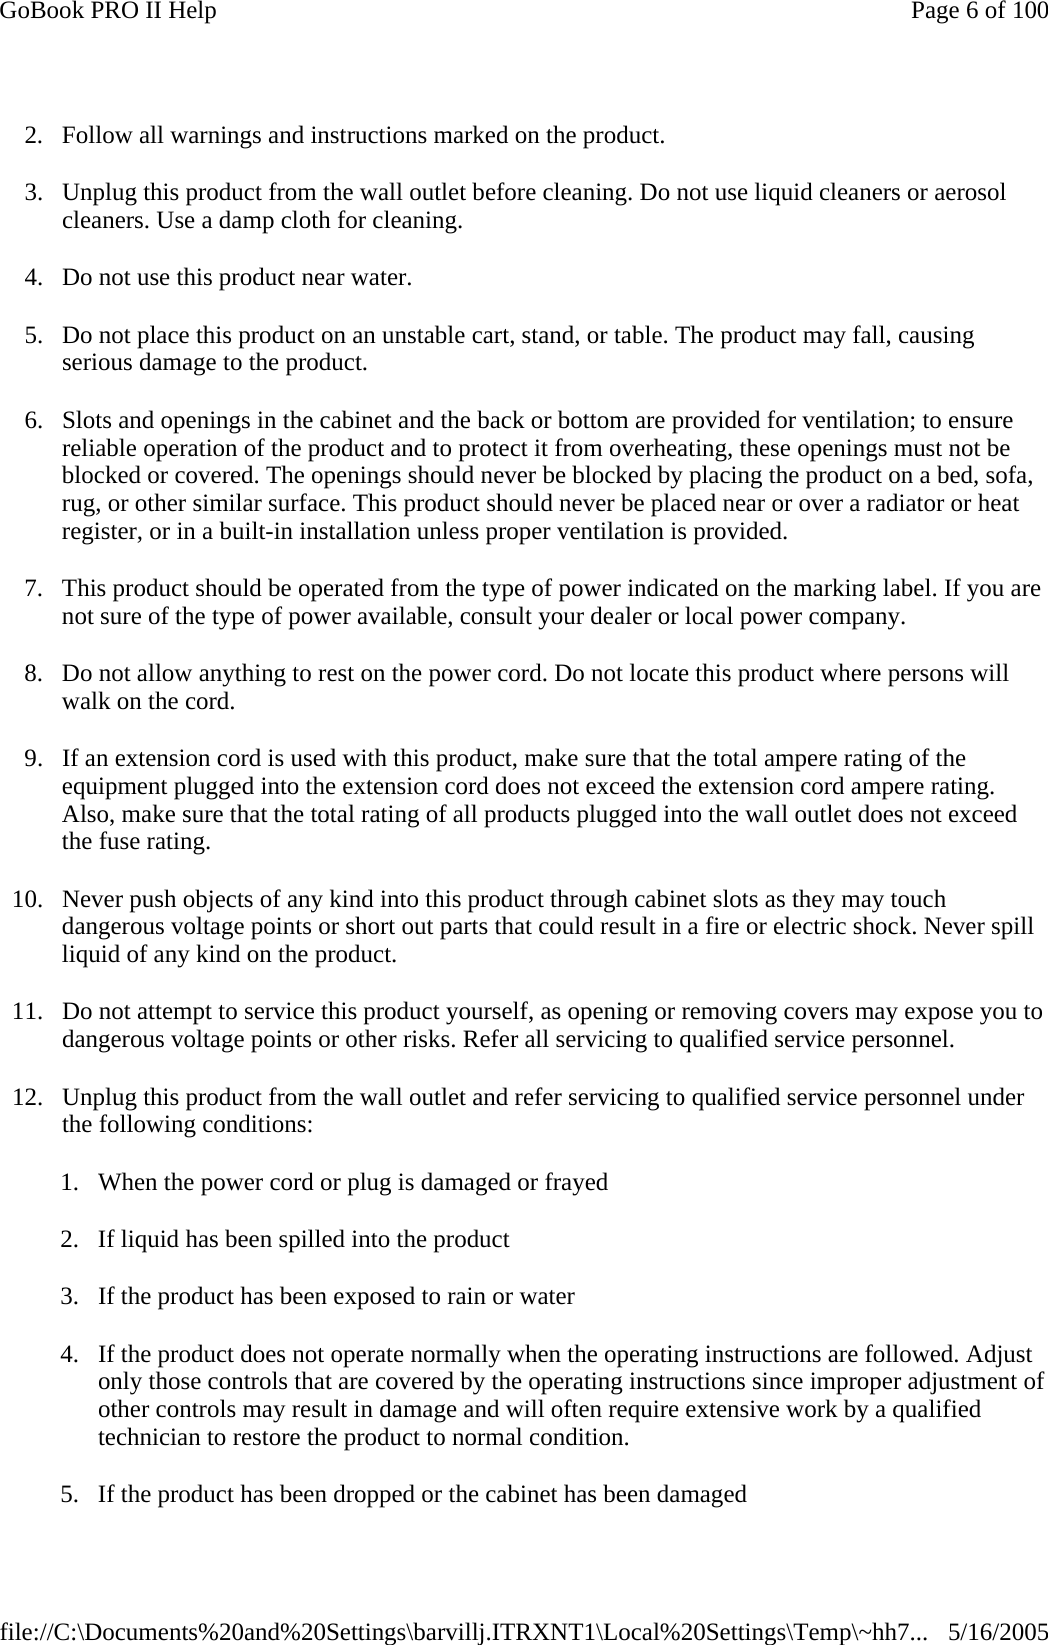 2. Follow all warnings and instructions marked on the product. 3. Unplug this product from the wall outlet before cleaning. Do not use liquid cleaners or aerosol cleaners. Use a damp cloth for cleaning. 4. Do not use this product near water. 5. Do not place this product on an unstable cart, stand, or table. The product may fall, causing serious damage to the product. 6. Slots and openings in the cabinet and the back or bottom are provided for ventilation; to ensure reliable operation of the product and to protect it from overheating, these openings must not be blocked or covered. The openings should never be blocked by placing the product on a bed, sofa, rug, or other similar surface. This product should never be placed near or over a radiator or heat register, or in a built-in installation unless proper ventilation is provided. 7. This product should be operated from the type of power indicated on the marking label. If you are not sure of the type of power available, consult your dealer or local power company. 8. Do not allow anything to rest on the power cord. Do not locate this product where persons will walk on the cord. 9. If an extension cord is used with this product, make sure that the total ampere rating of the equipment plugged into the extension cord does not exceed the extension cord ampere rating. Also, make sure that the total rating of all products plugged into the wall outlet does not exceed the fuse rating. 10. Never push objects of any kind into this product through cabinet slots as they may touch dangerous voltage points or short out parts that could result in a fire or electric shock. Never spill liquid of any kind on the product. 11. Do not attempt to service this product yourself, as opening or removing covers may expose you to dangerous voltage points or other risks. Refer all servicing to qualified service personnel. 12. Unplug this product from the wall outlet and refer servicing to qualified service personnel under the following conditions: 1. When the power cord or plug is damaged or frayed  2. If liquid has been spilled into the product 3. If the product has been exposed to rain or water 4. If the product does not operate normally when the operating instructions are followed. Adjust only those controls that are covered by the operating instructions since improper adjustment of other controls may result in damage and will often require extensive work by a qualified technician to restore the product to normal condition. 5. If the product has been dropped or the cabinet has been damagedPage 6 of 100GoBook PRO II Help5/16/2005file://C:\Documents%20and%20Settings\barvillj.ITRXNT1\Local%20Settings\Temp\~hh7...